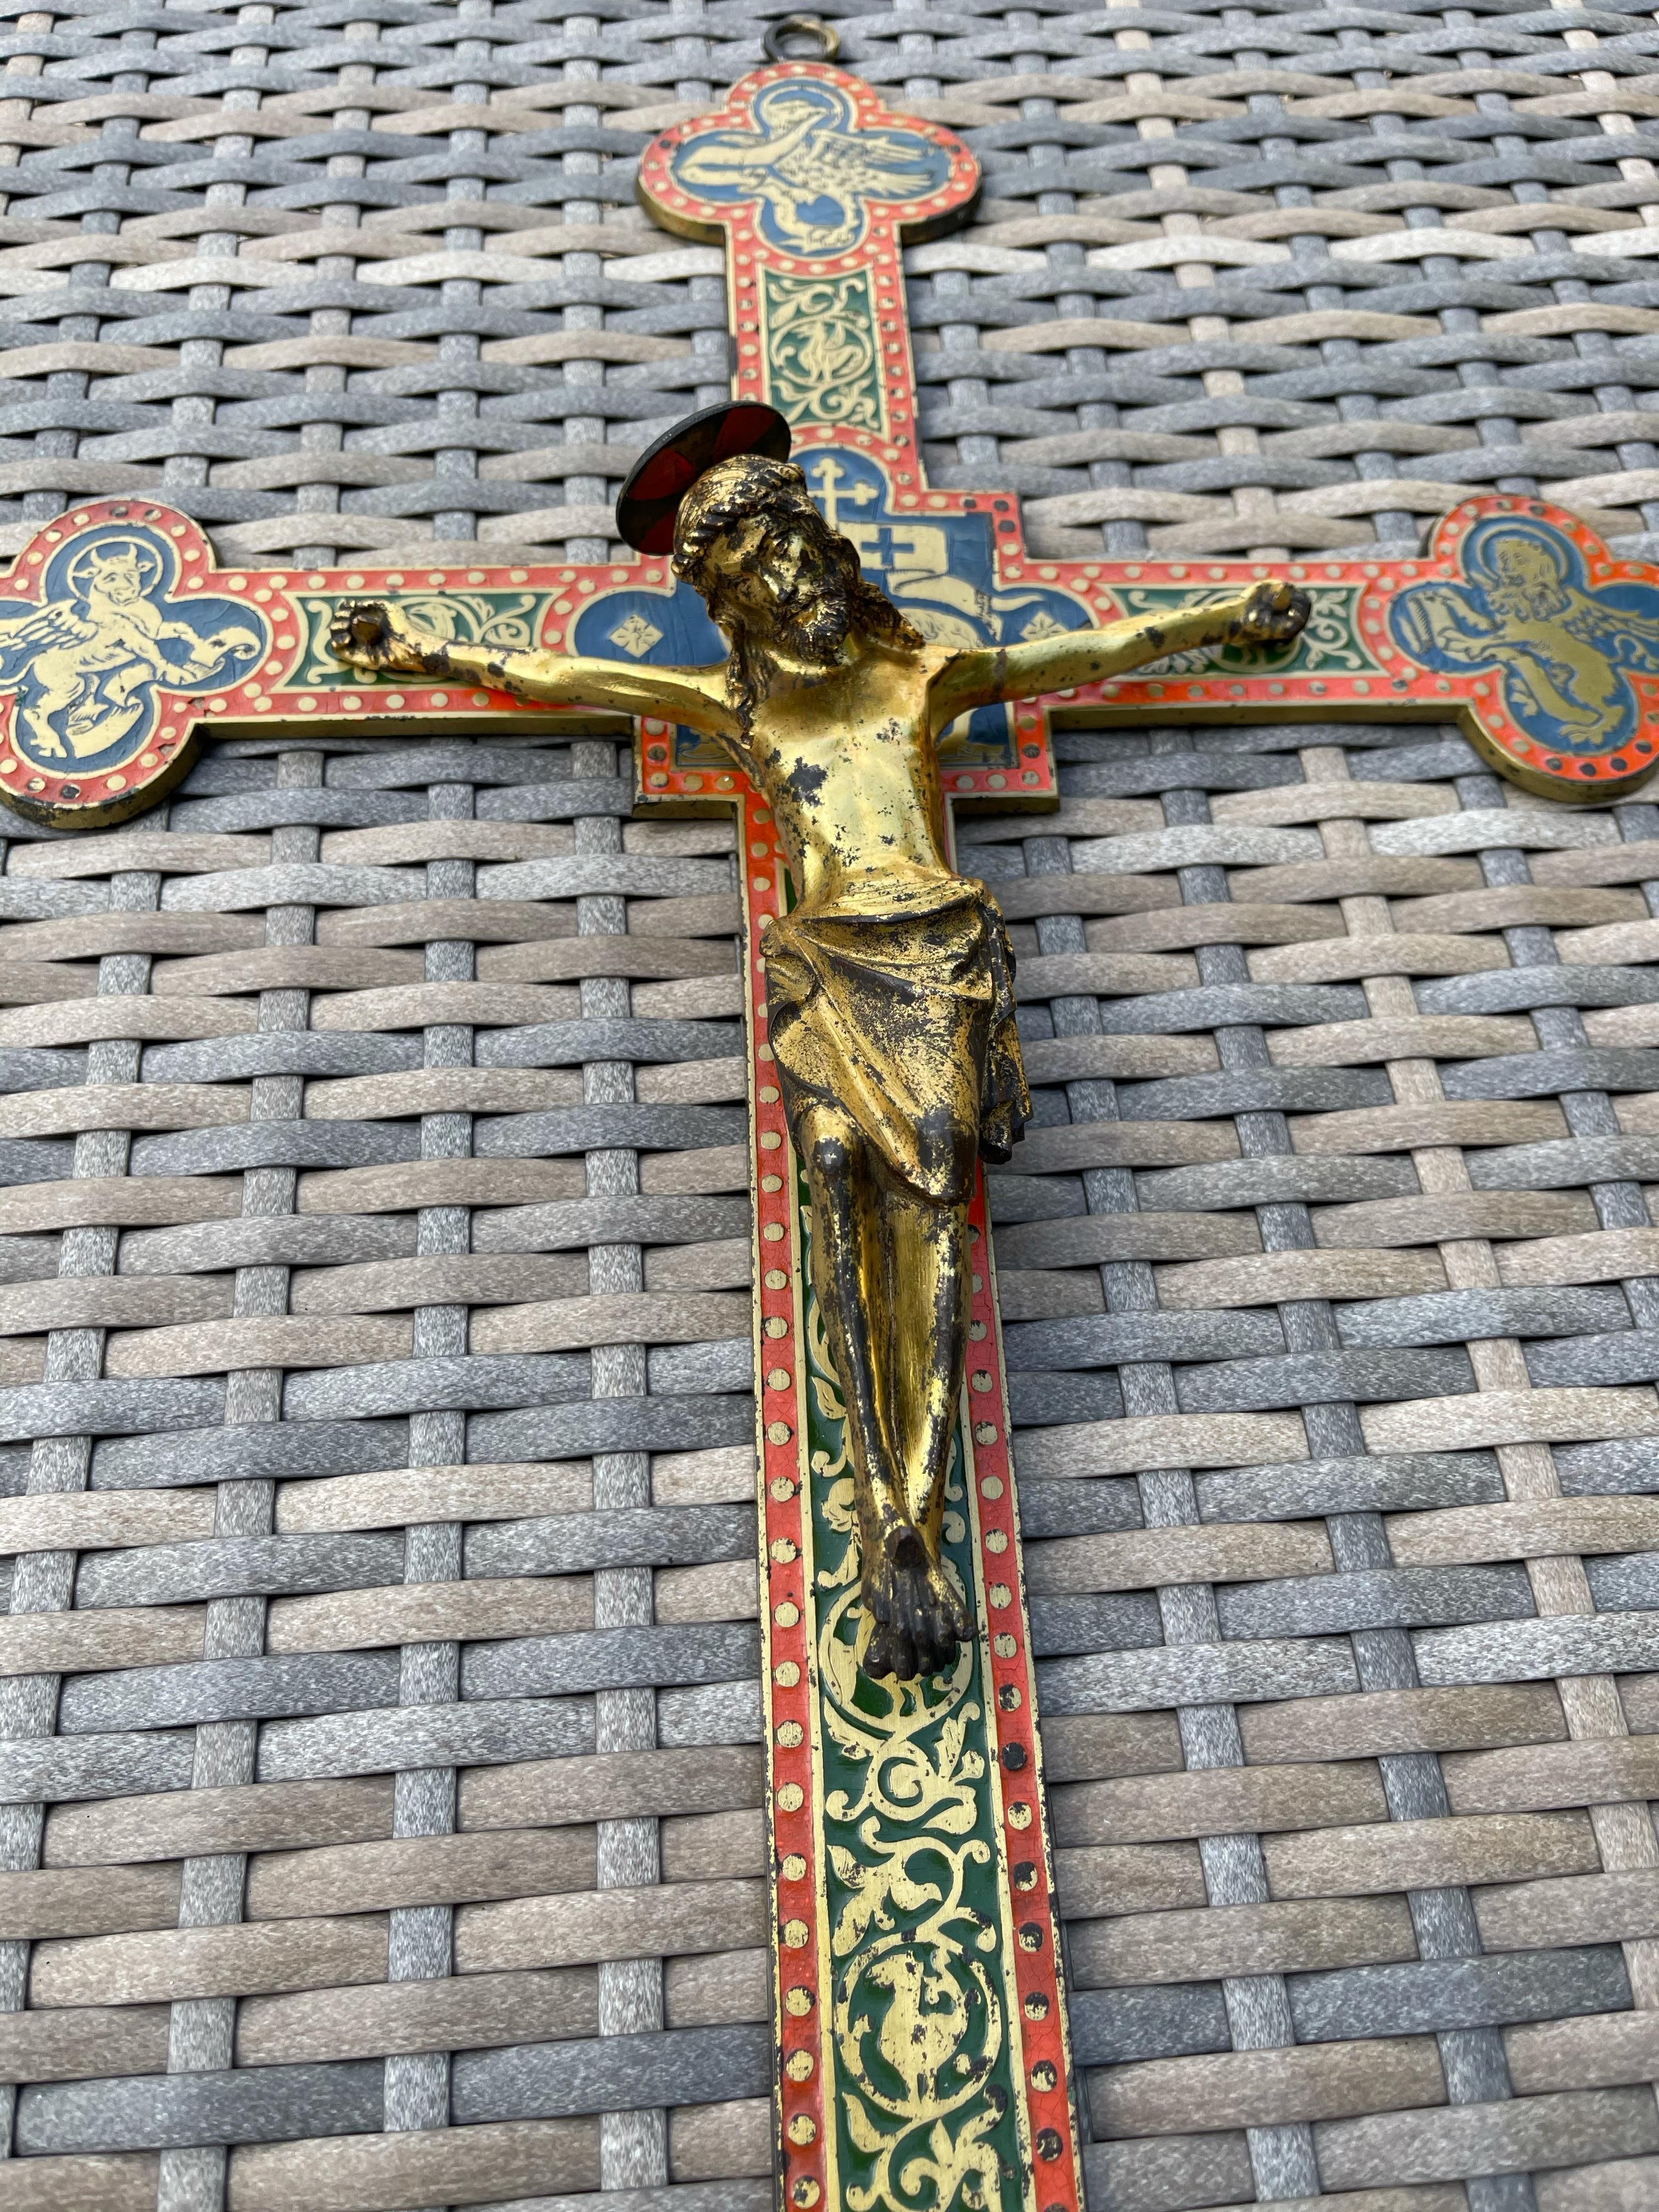 Good size and impressive hand-crafted Gothic church wall crucifix

This beautifully shaped and all handcrafted crucifix for wall mounting comes with a top quality made and finely detailed, gilt bronze corpus of Christ. The cross is decorated with